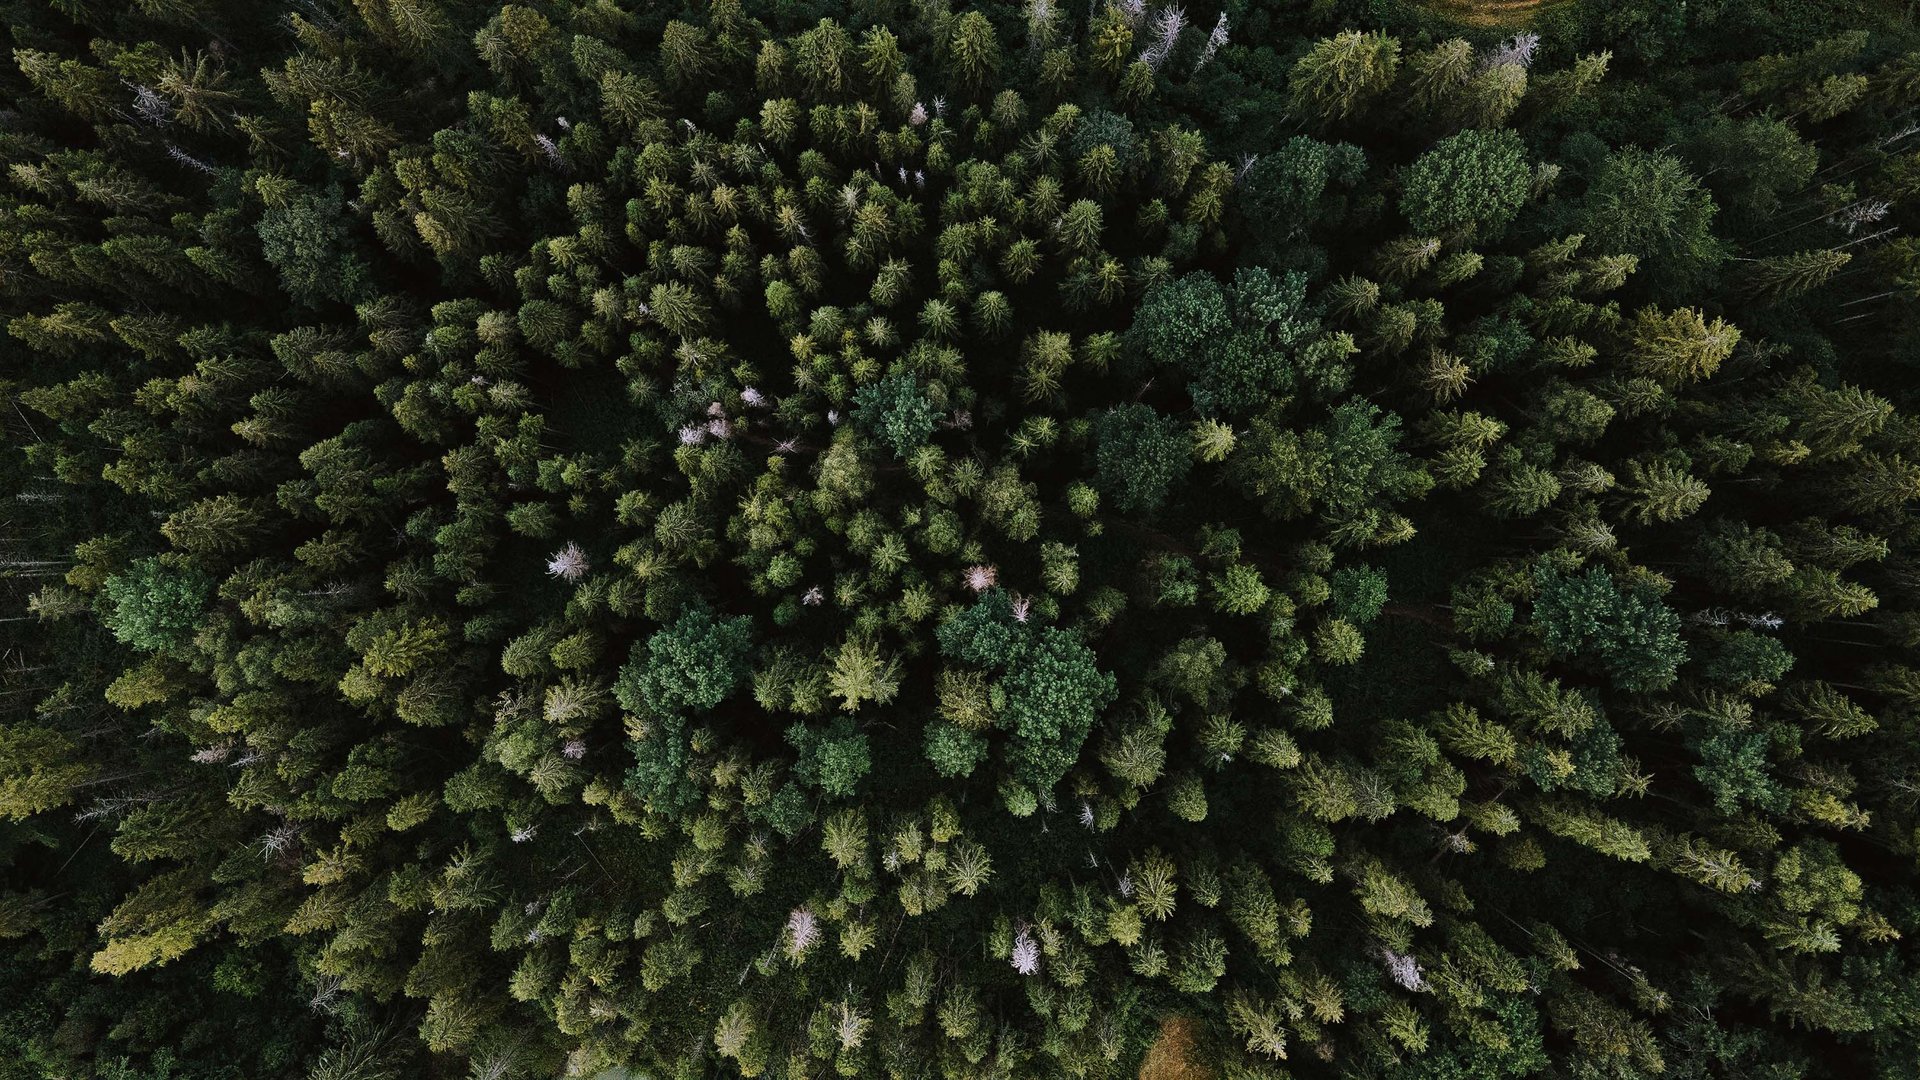 An aerial view of a dense forest with lush green trees of varying shades. The image captures the natural density and diversity within the forest.